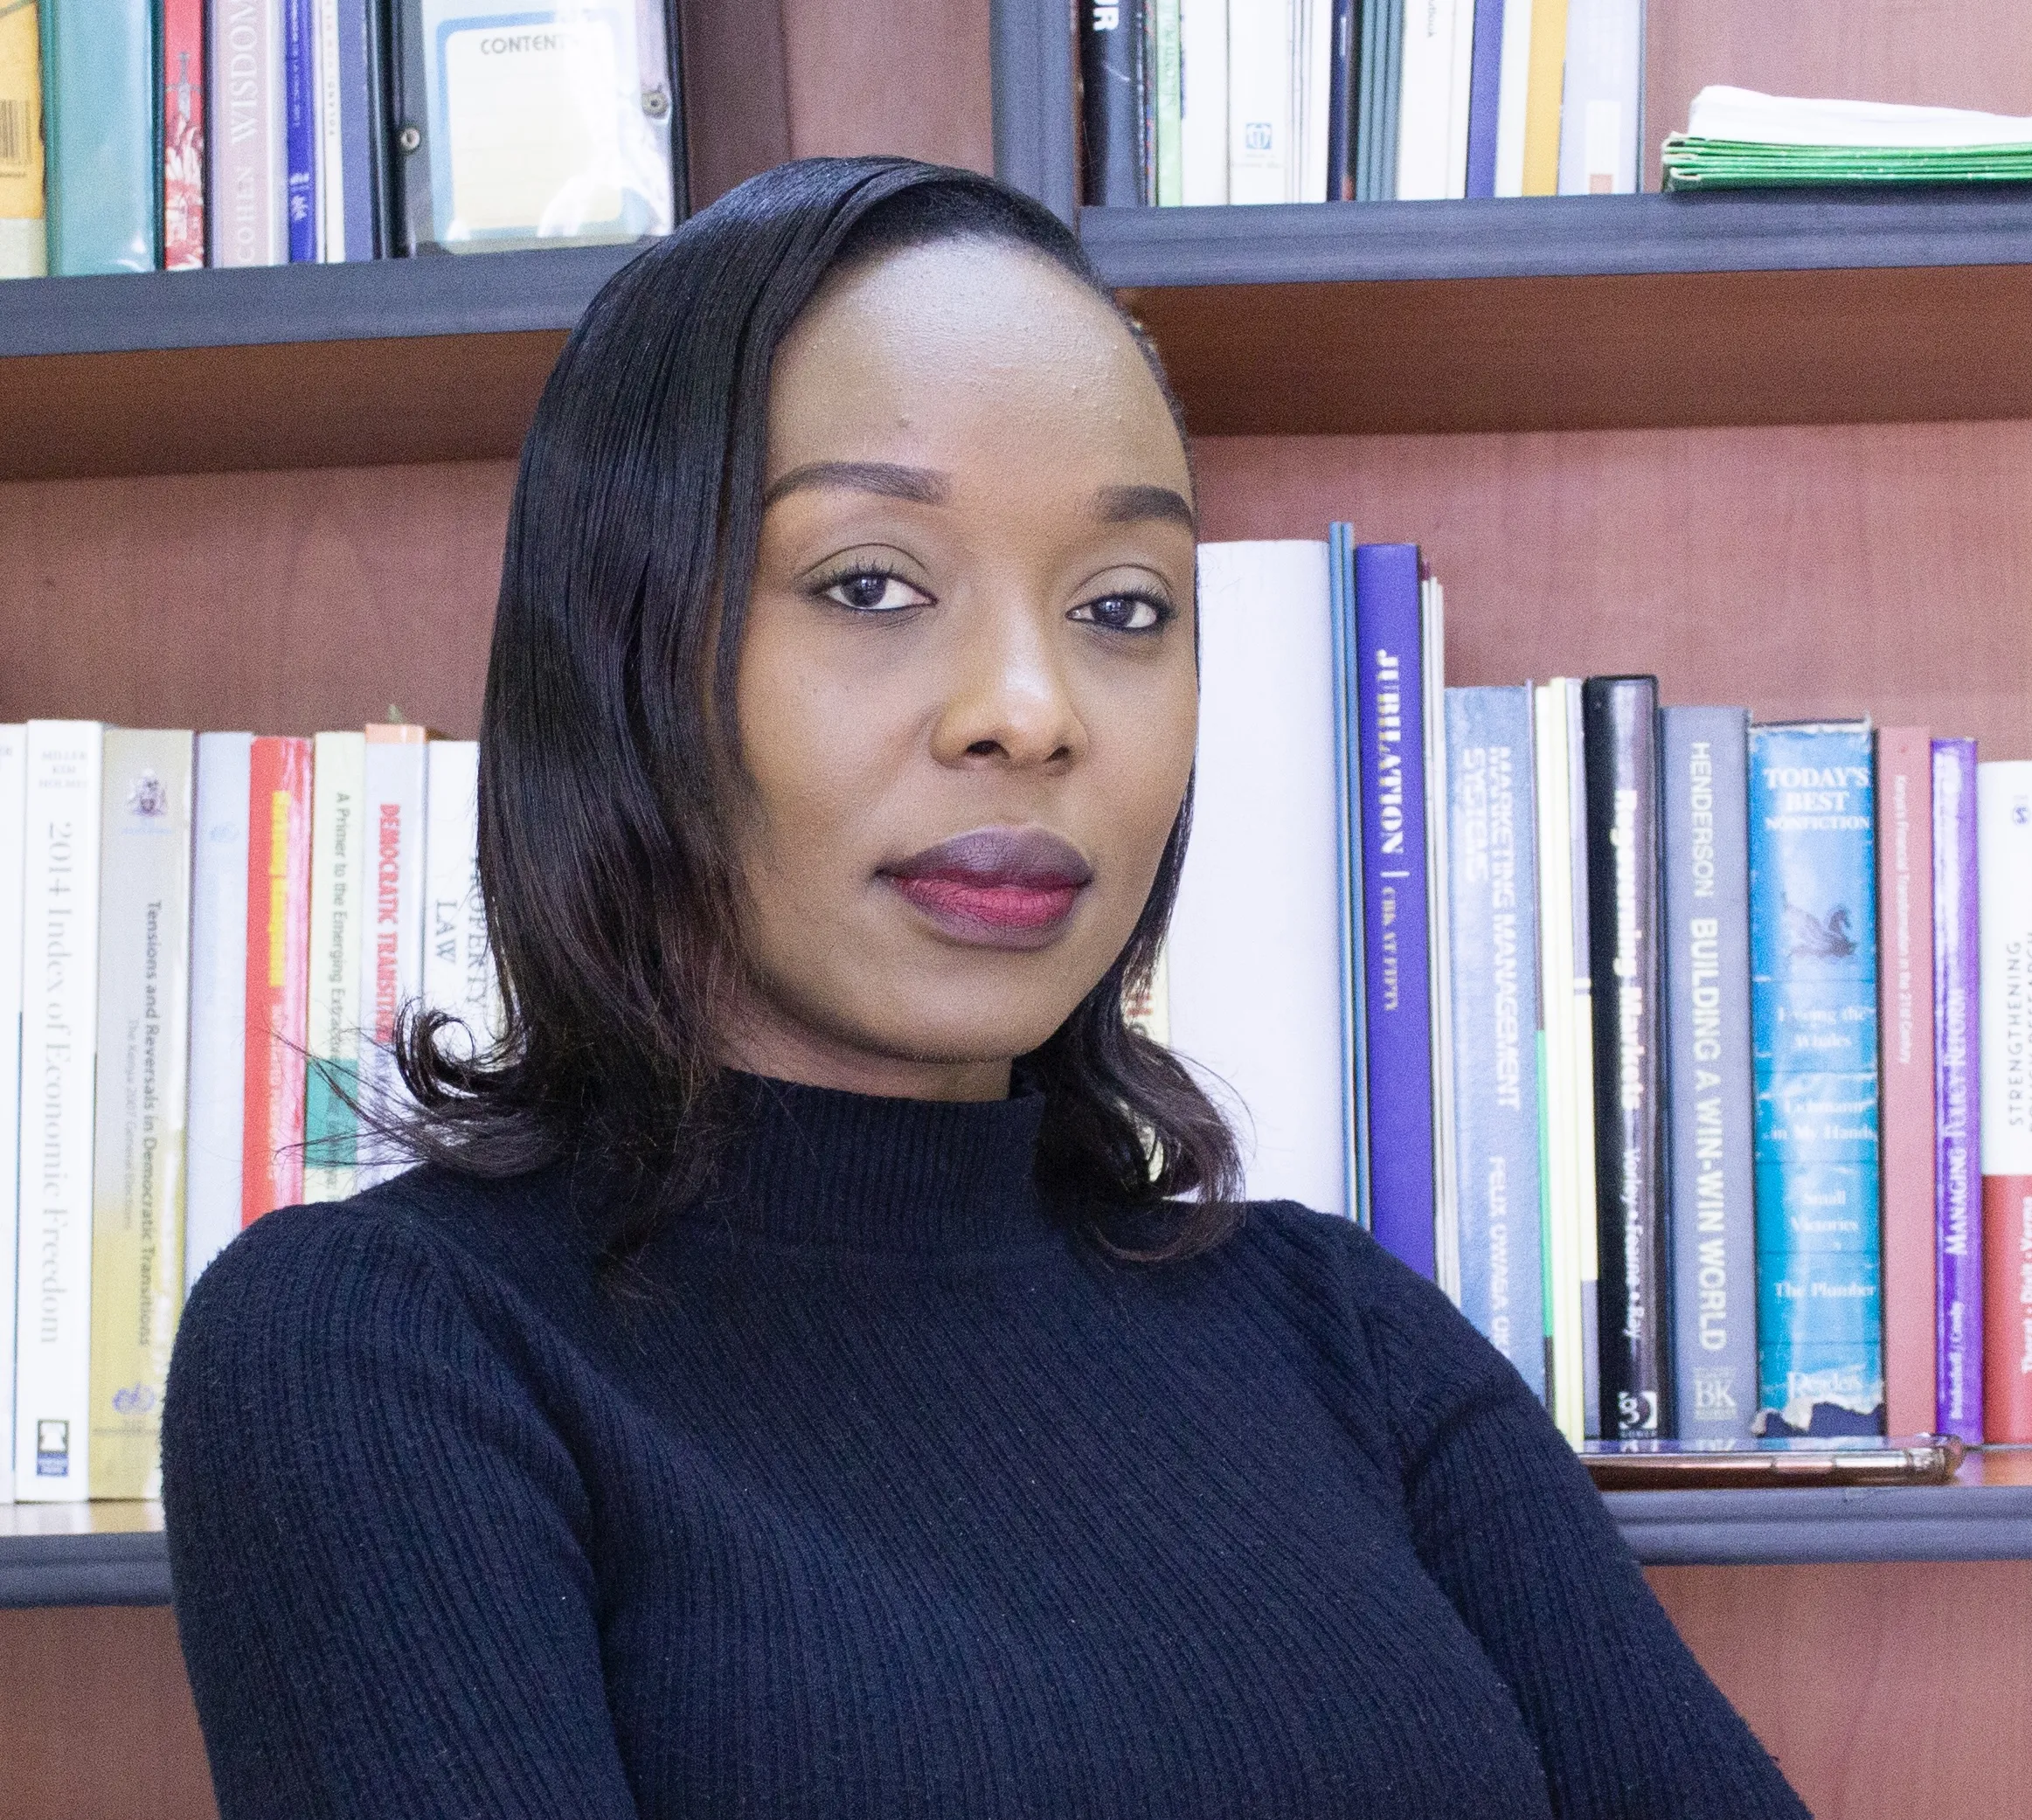 Jackline KagumeJackline Kagume is a lawyer and the current programme lead for the Law and Economy Programme at the Institute of Economic Affairs (IEA) Kenya.